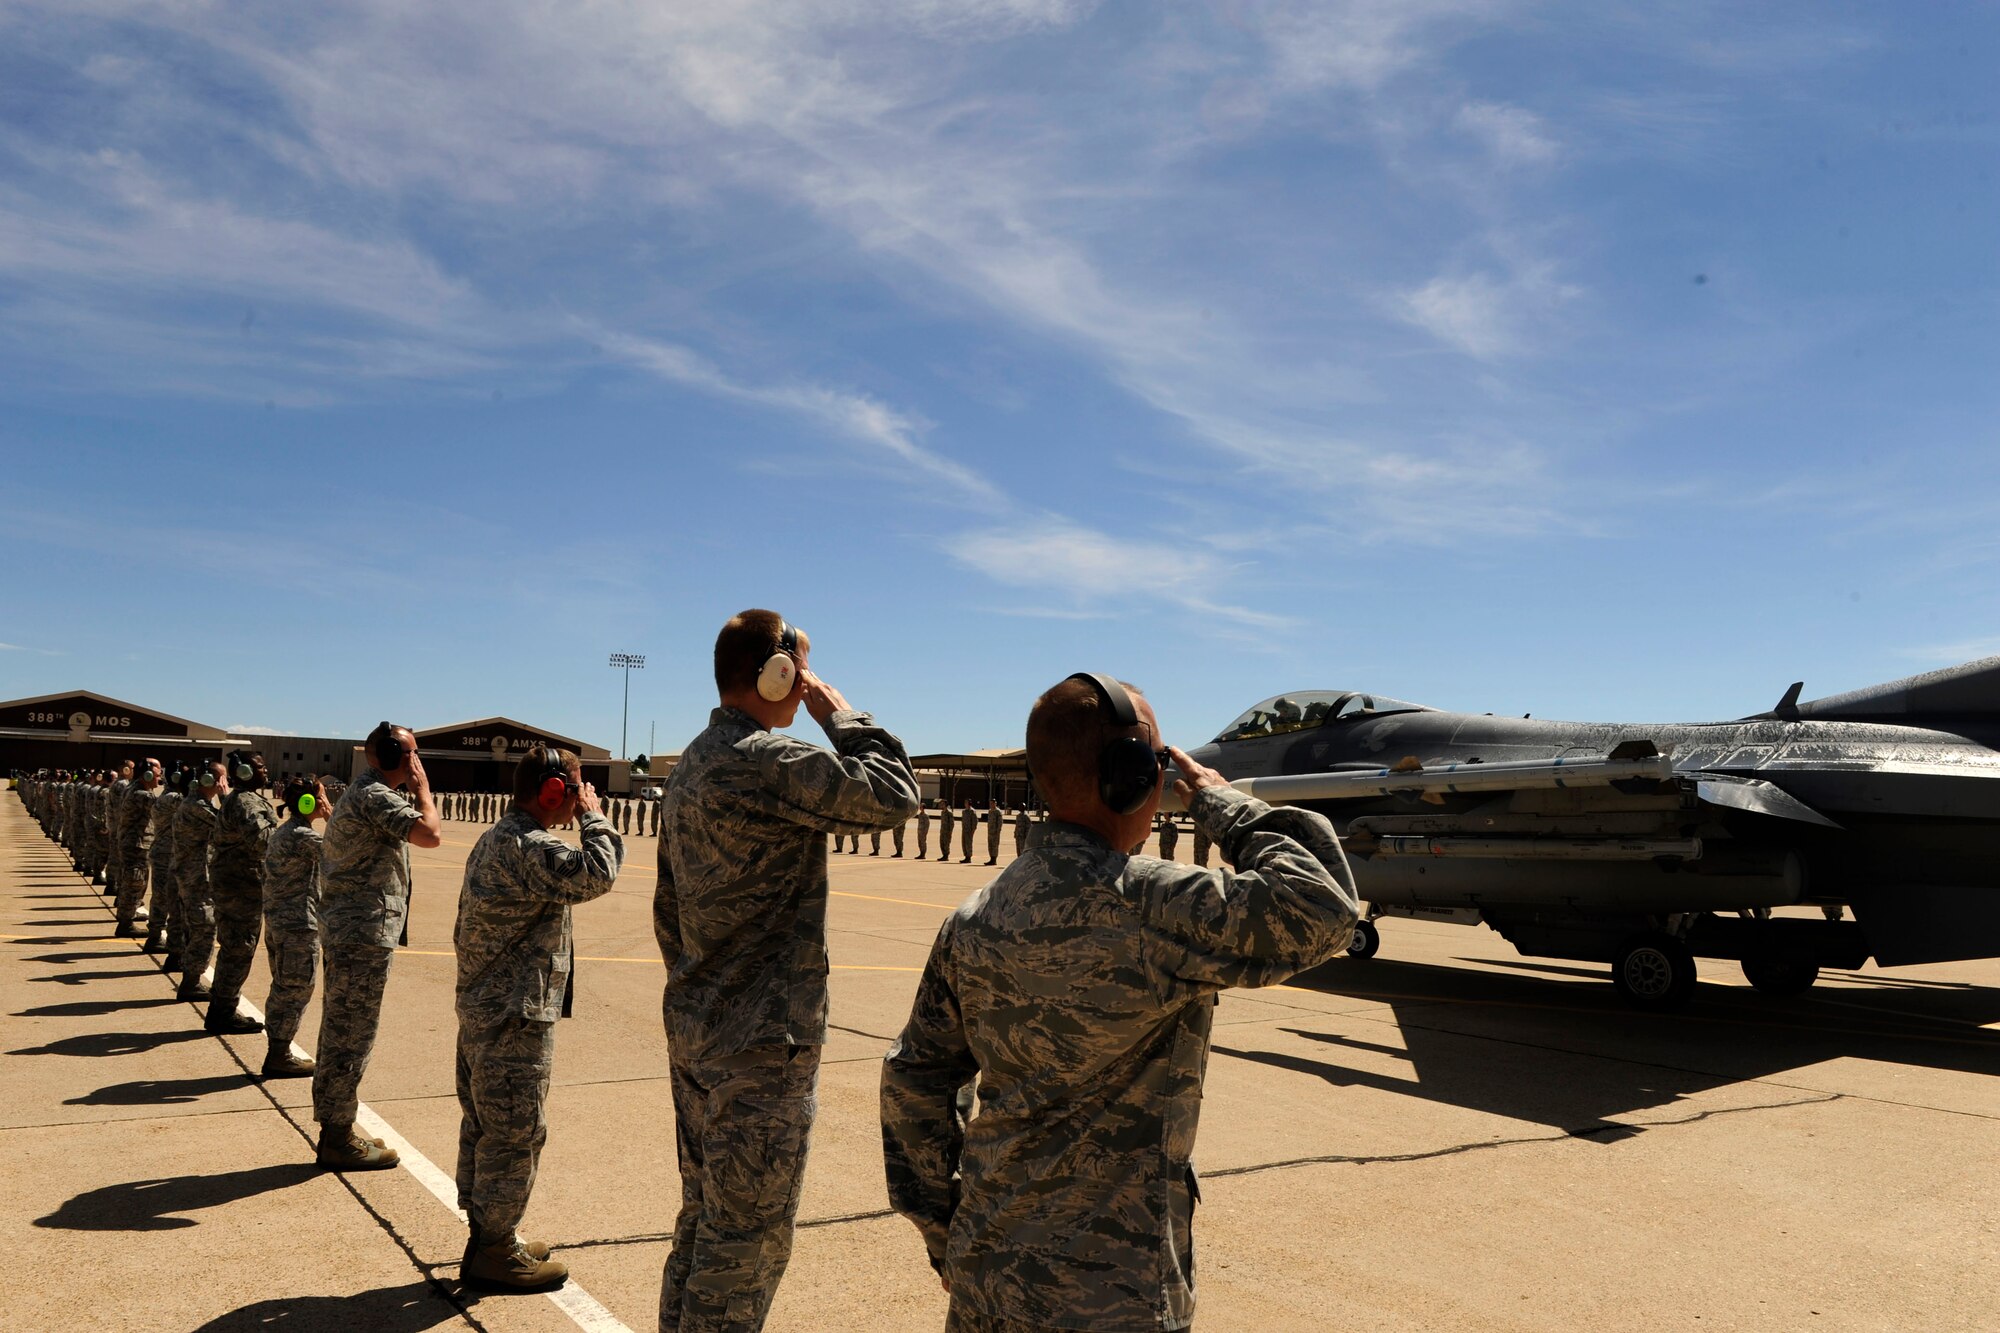 Airmen from the 388th Fighter Wing salute their commander, Col. Scott Long, as he taxis down the runway on his final F-16 flight at Hill Air Force Base, Utah, June 6, 2013. Long is a command pilot with more than 2,900 flying hours, including more than 130 combat missions in support of Operations Desert Storm, Southern Watch and Enduring Freedom. (U.S. Air Force photo/Airman 1st Class Scott Jackson/Released)

